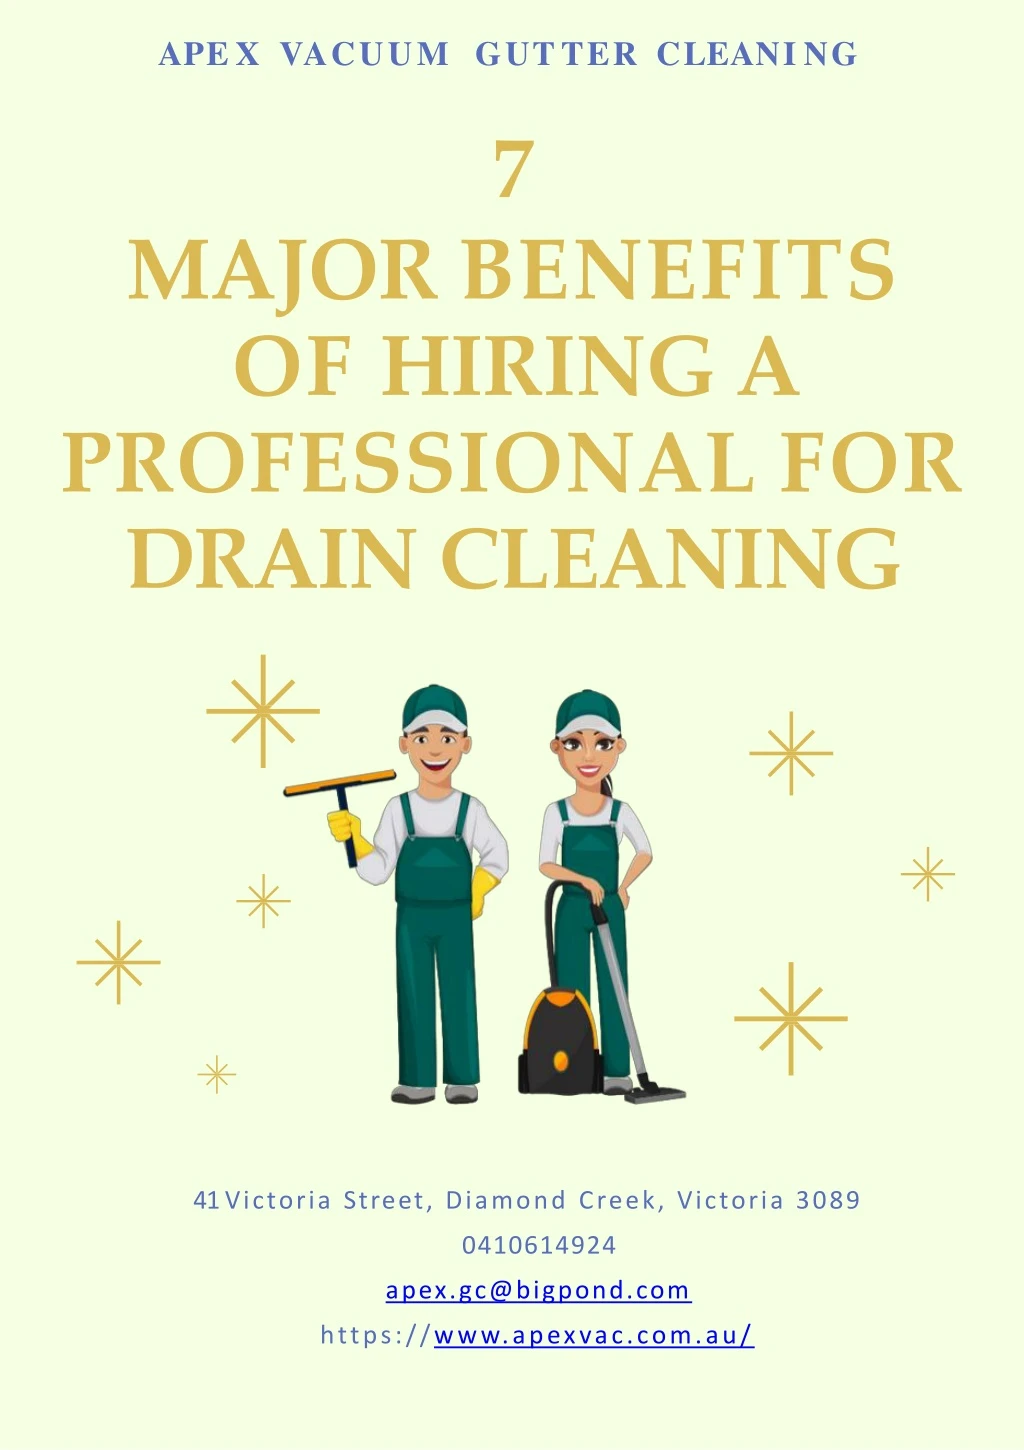 7 major benefits of hiring a professional for drain cleaning